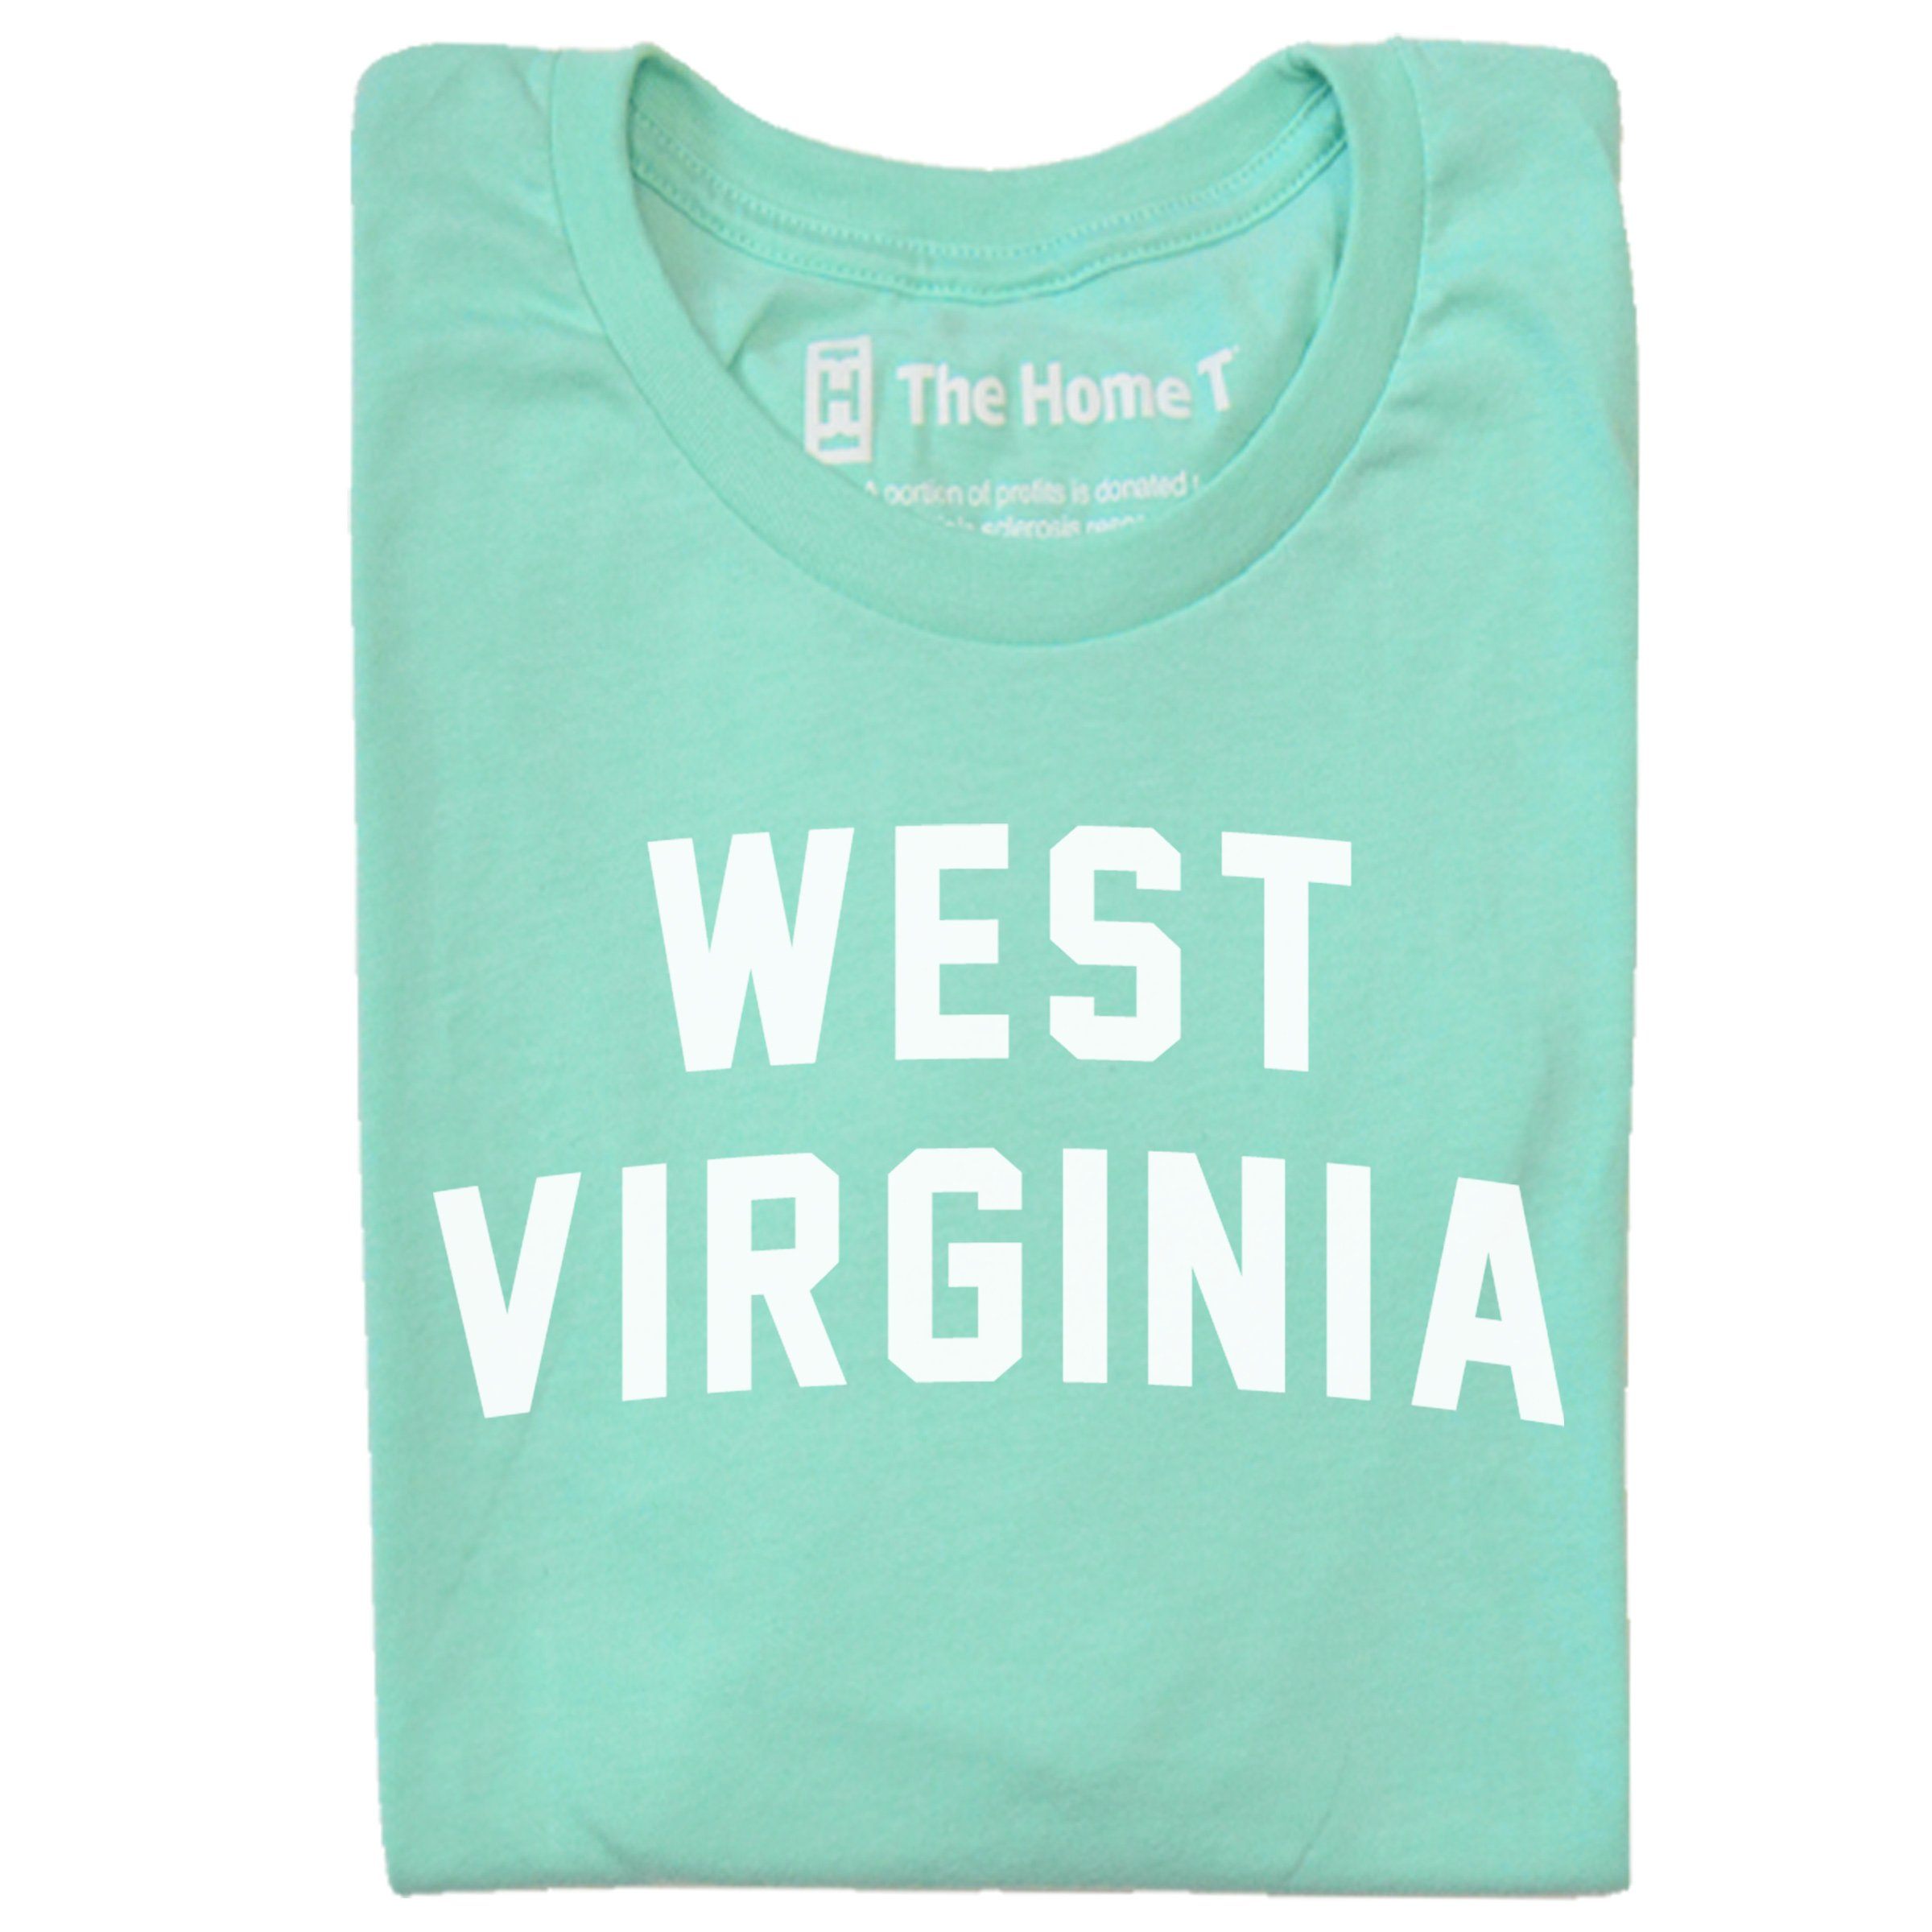 West Virginia Arched The Home T XS Mint